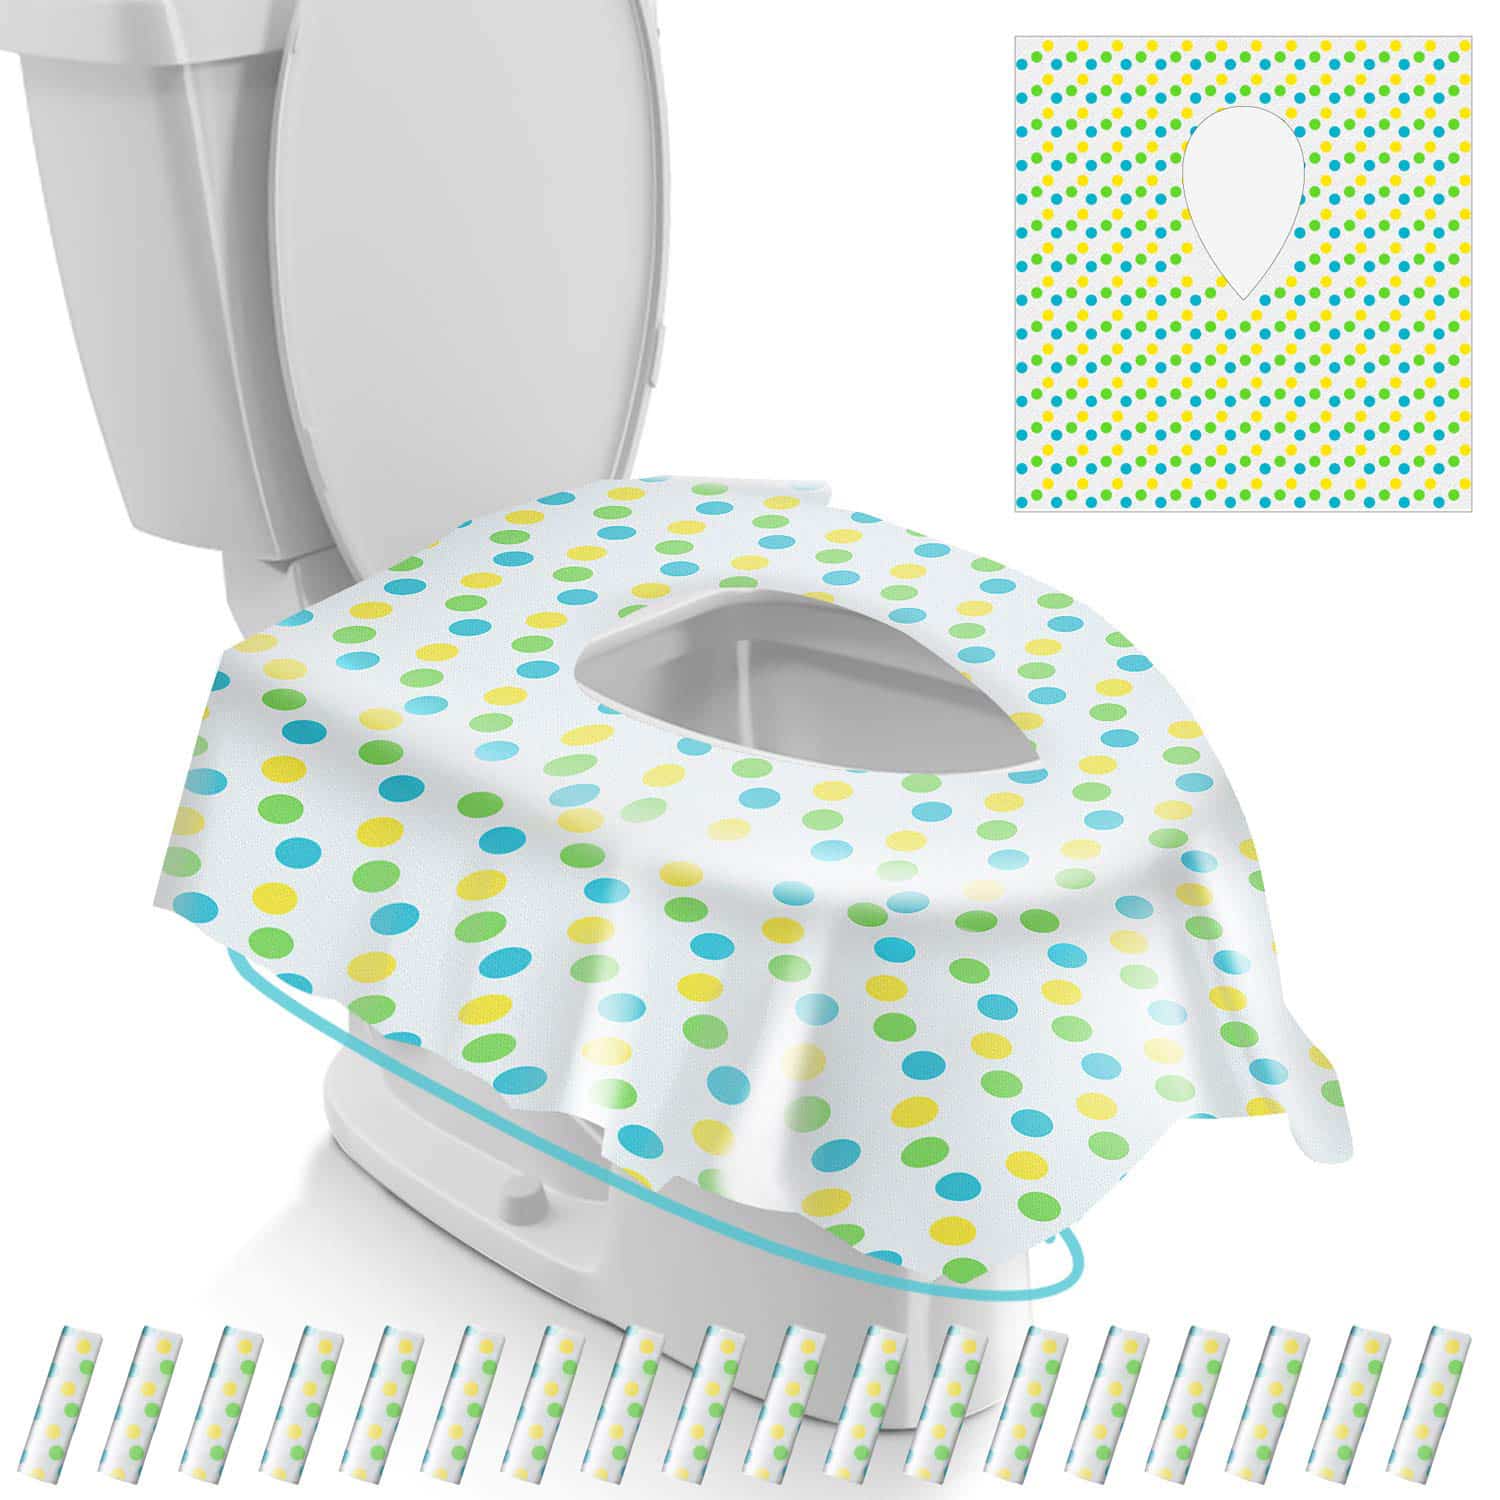 disposable travel potty seat